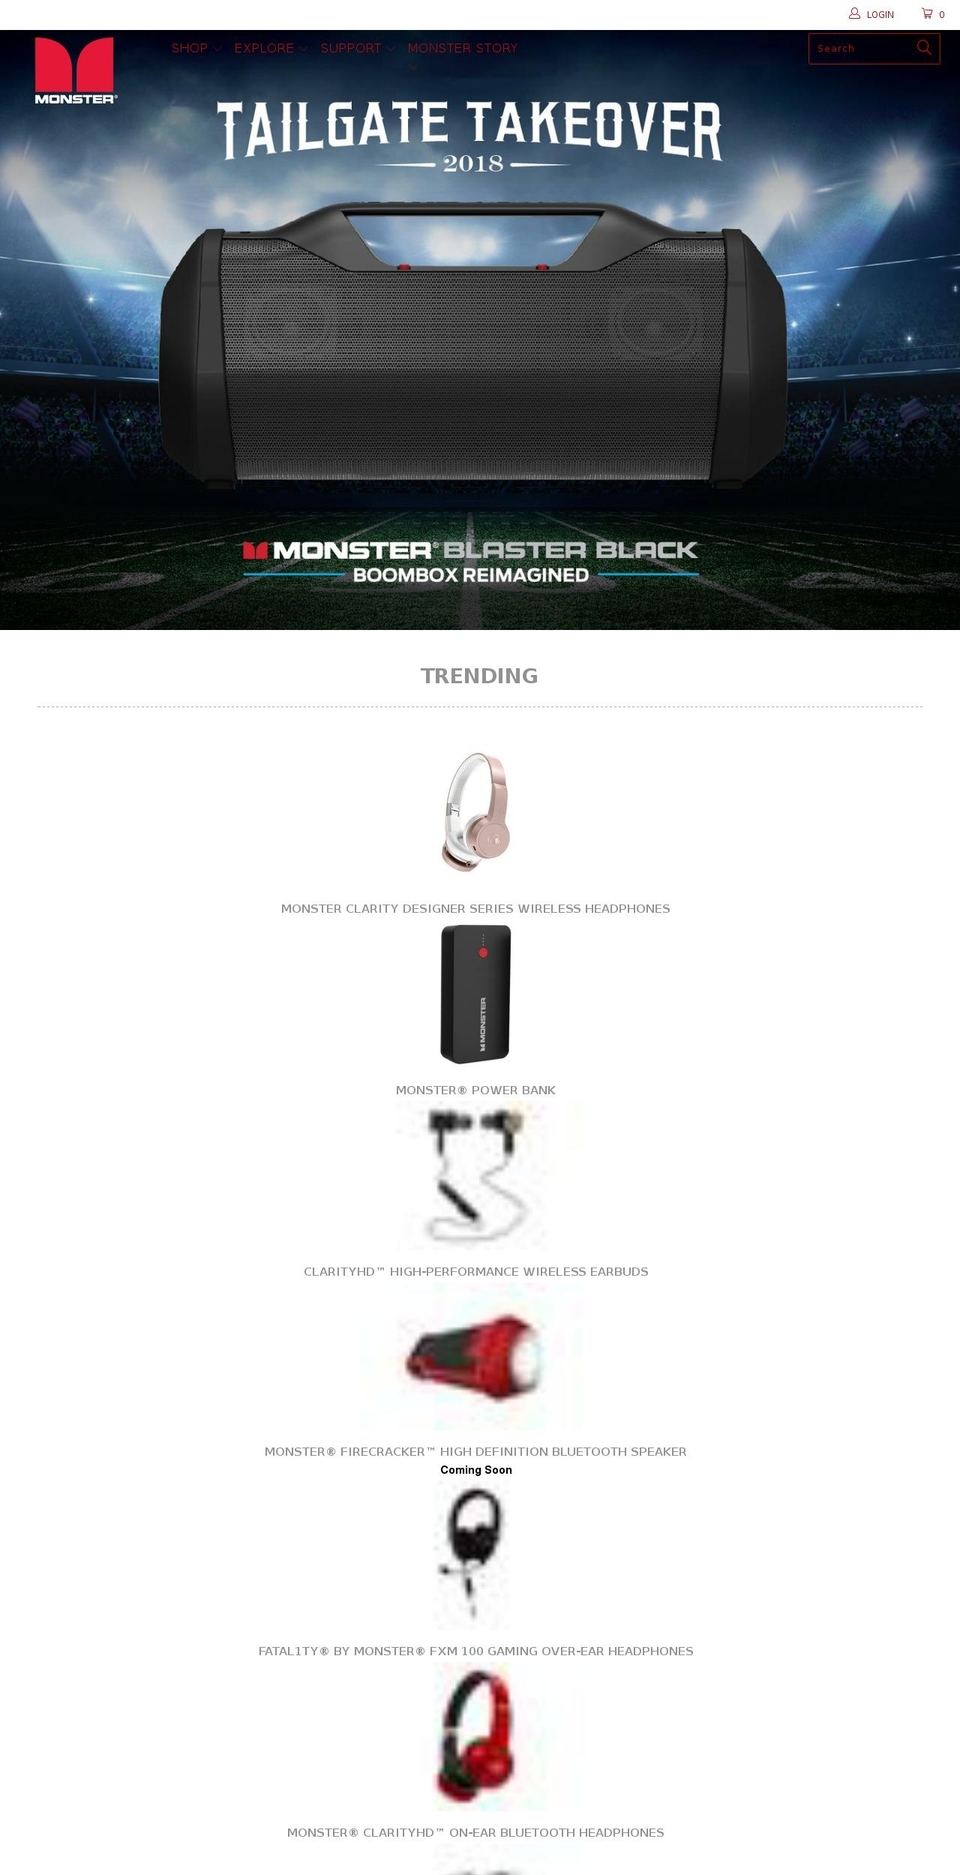 Checkout Upgrade [July 16] Shopify theme site example highperformanceinearspeakers.com